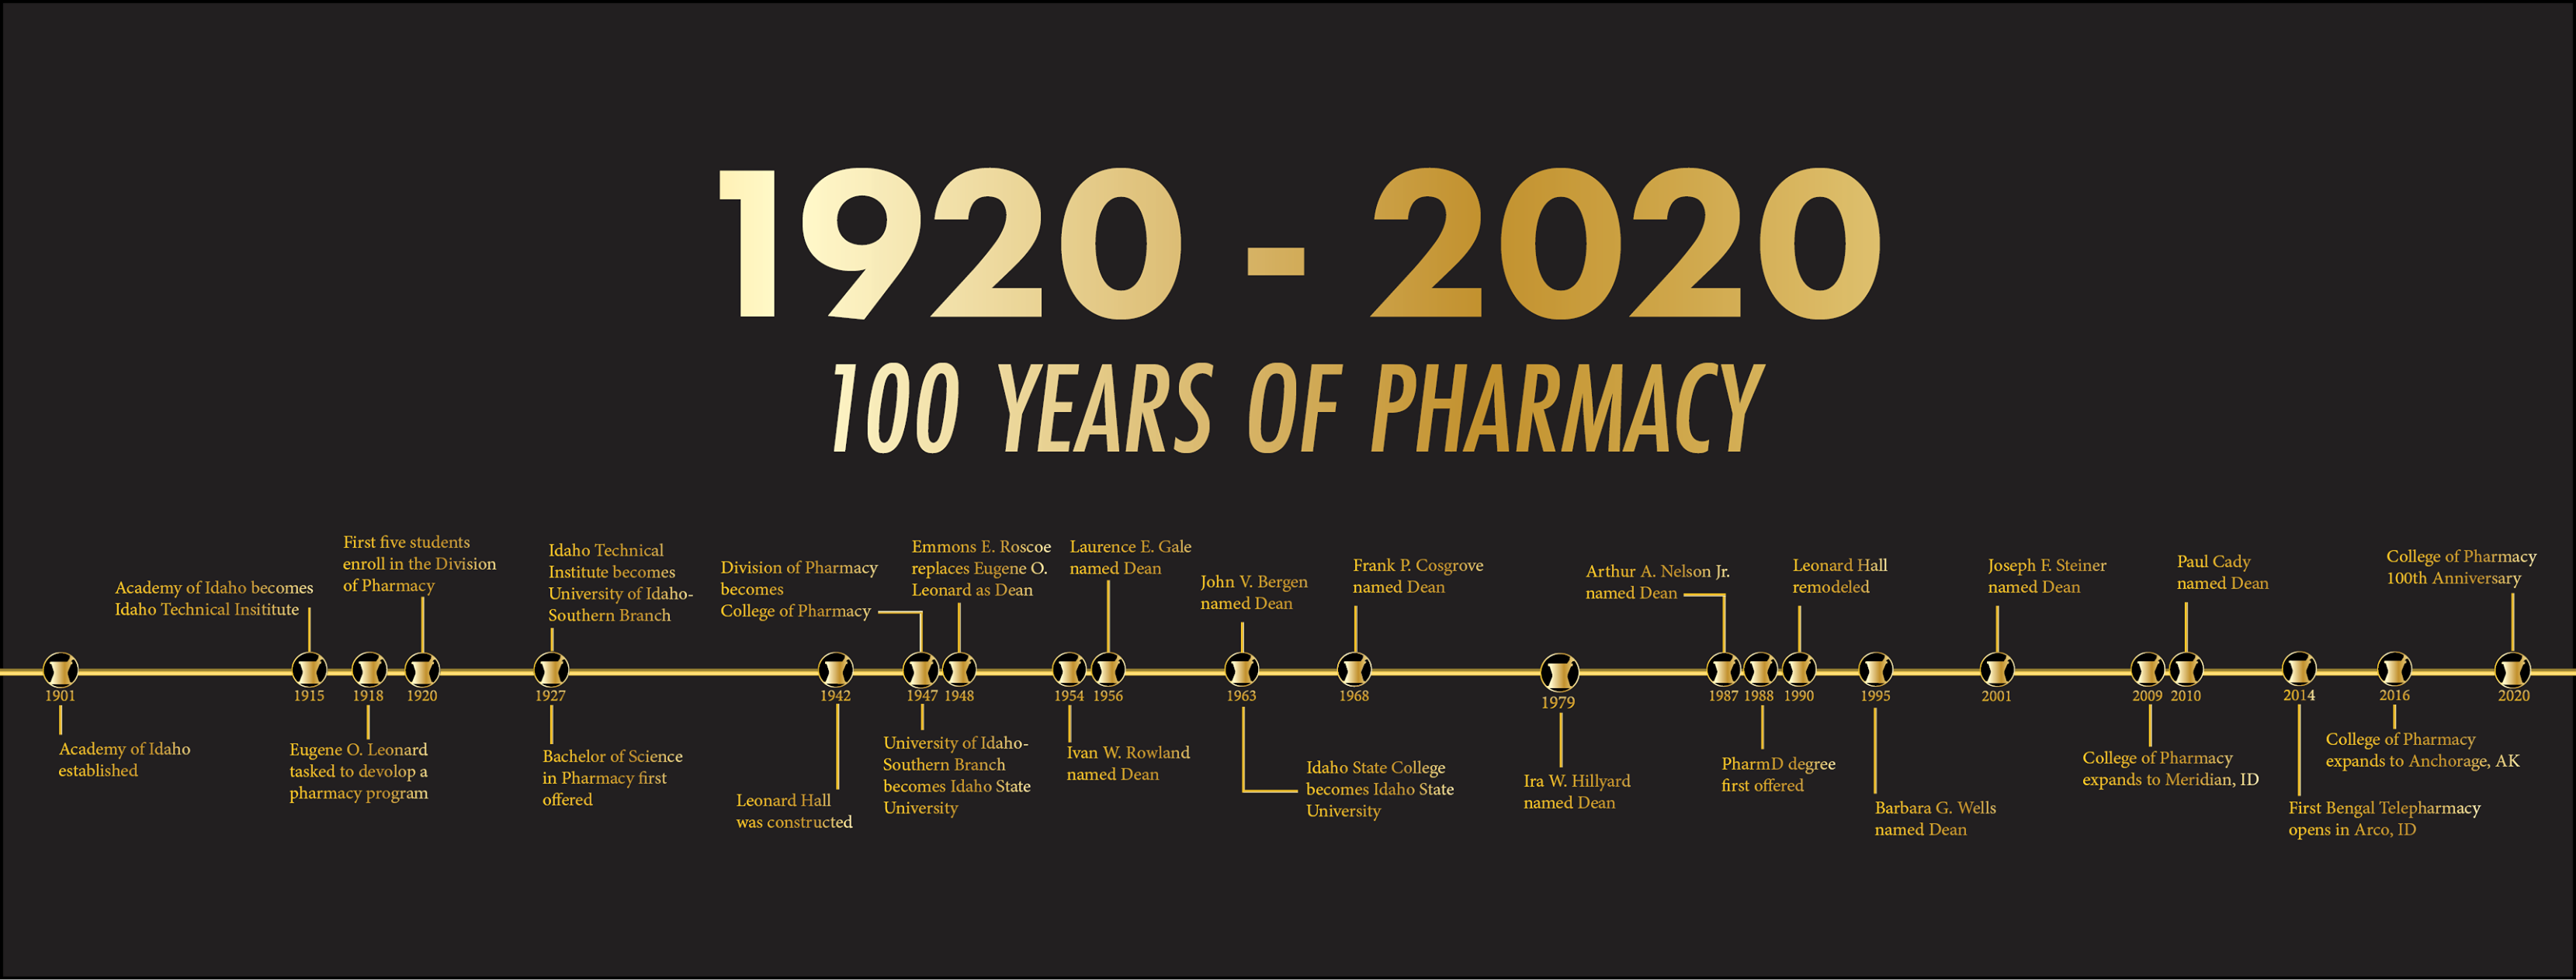 a timeline showing 100 years of progress at the college of pharmacy